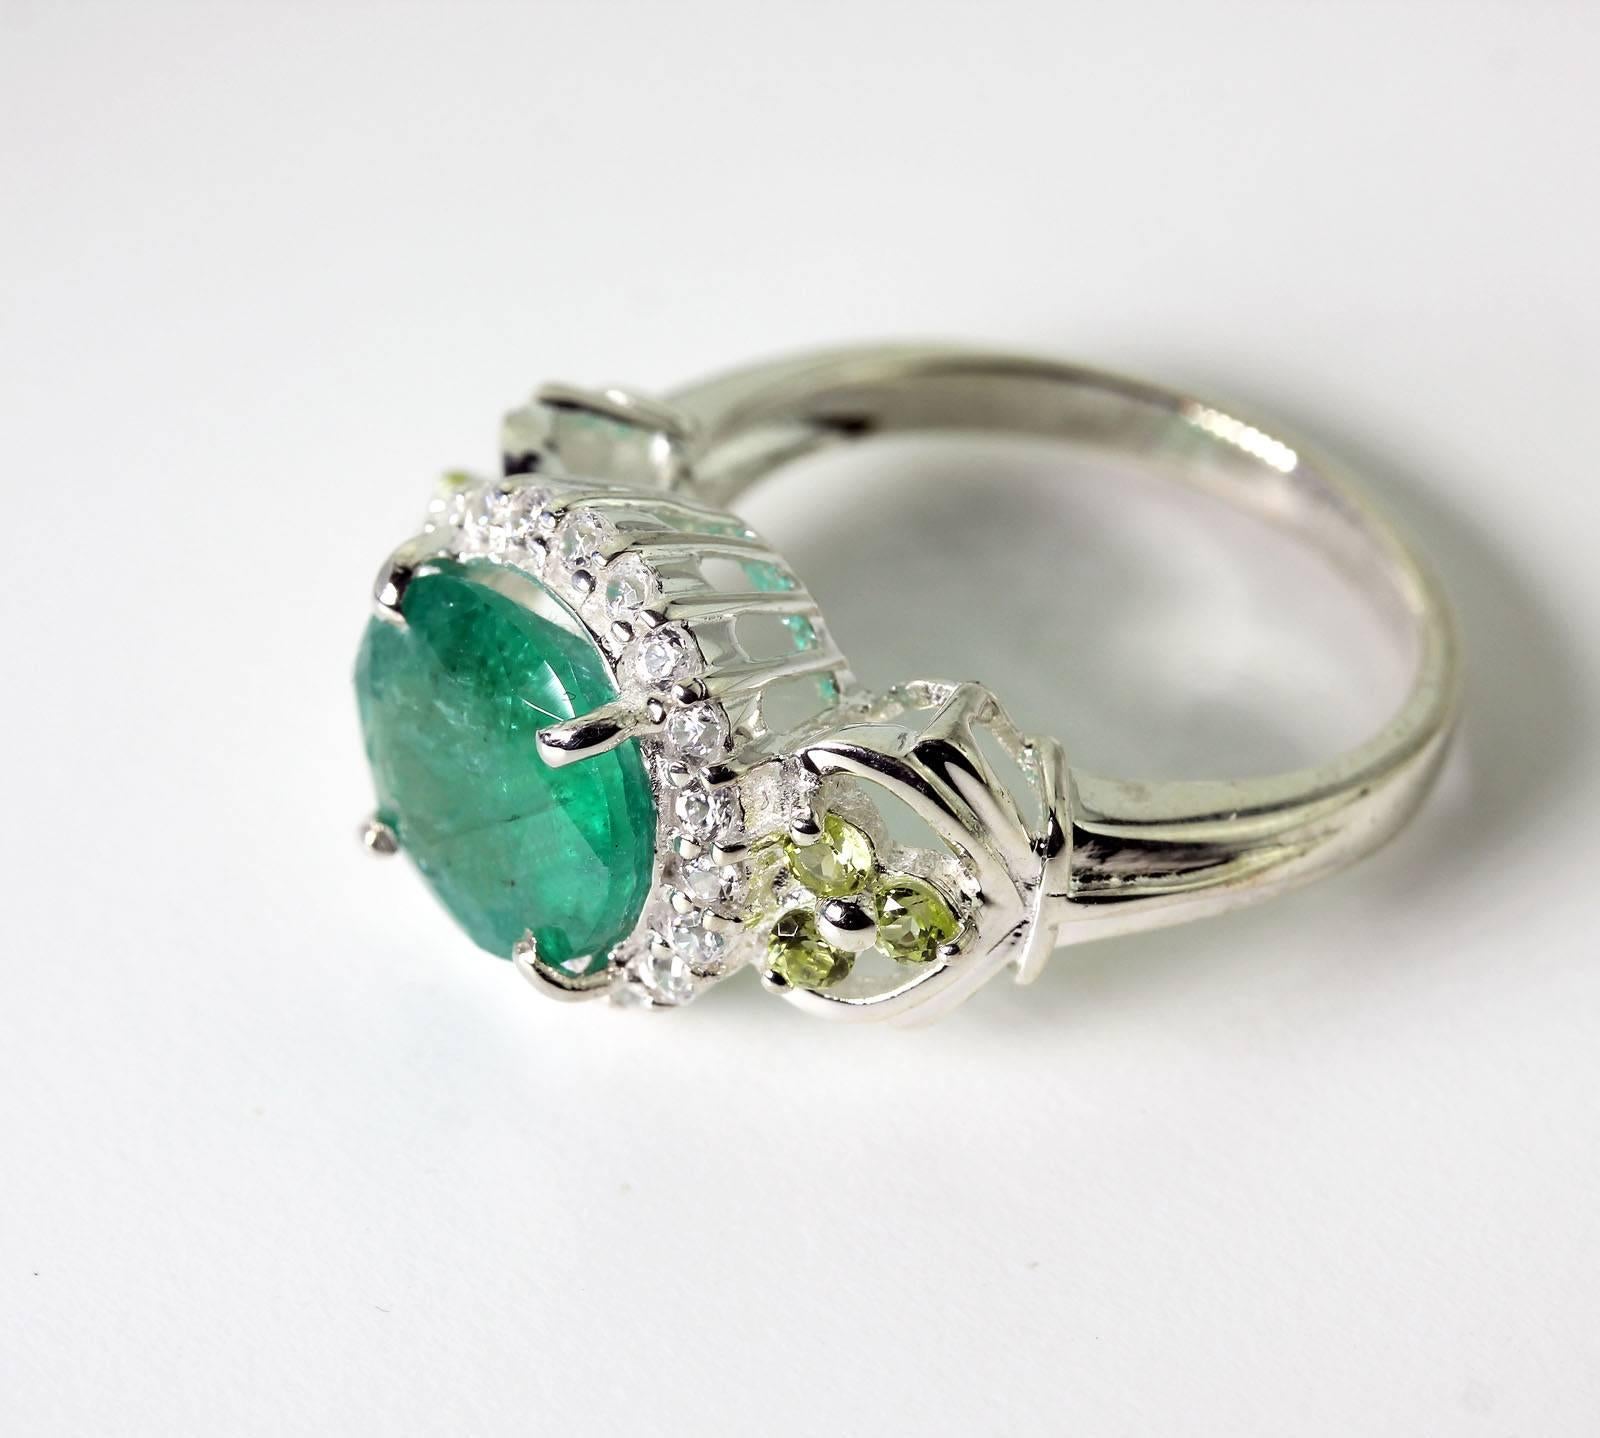 Bright green natural 3 Carat Brazilian Emerald enhanced with tiny little Peridot 
 and itty bitty little natural white Zircons set in Sterling Silver ring.  This Emerald truly sparkles green.
Size:  roval 10.2 mm x 8.7 mm
Ring:  Sterling Silver
Ring